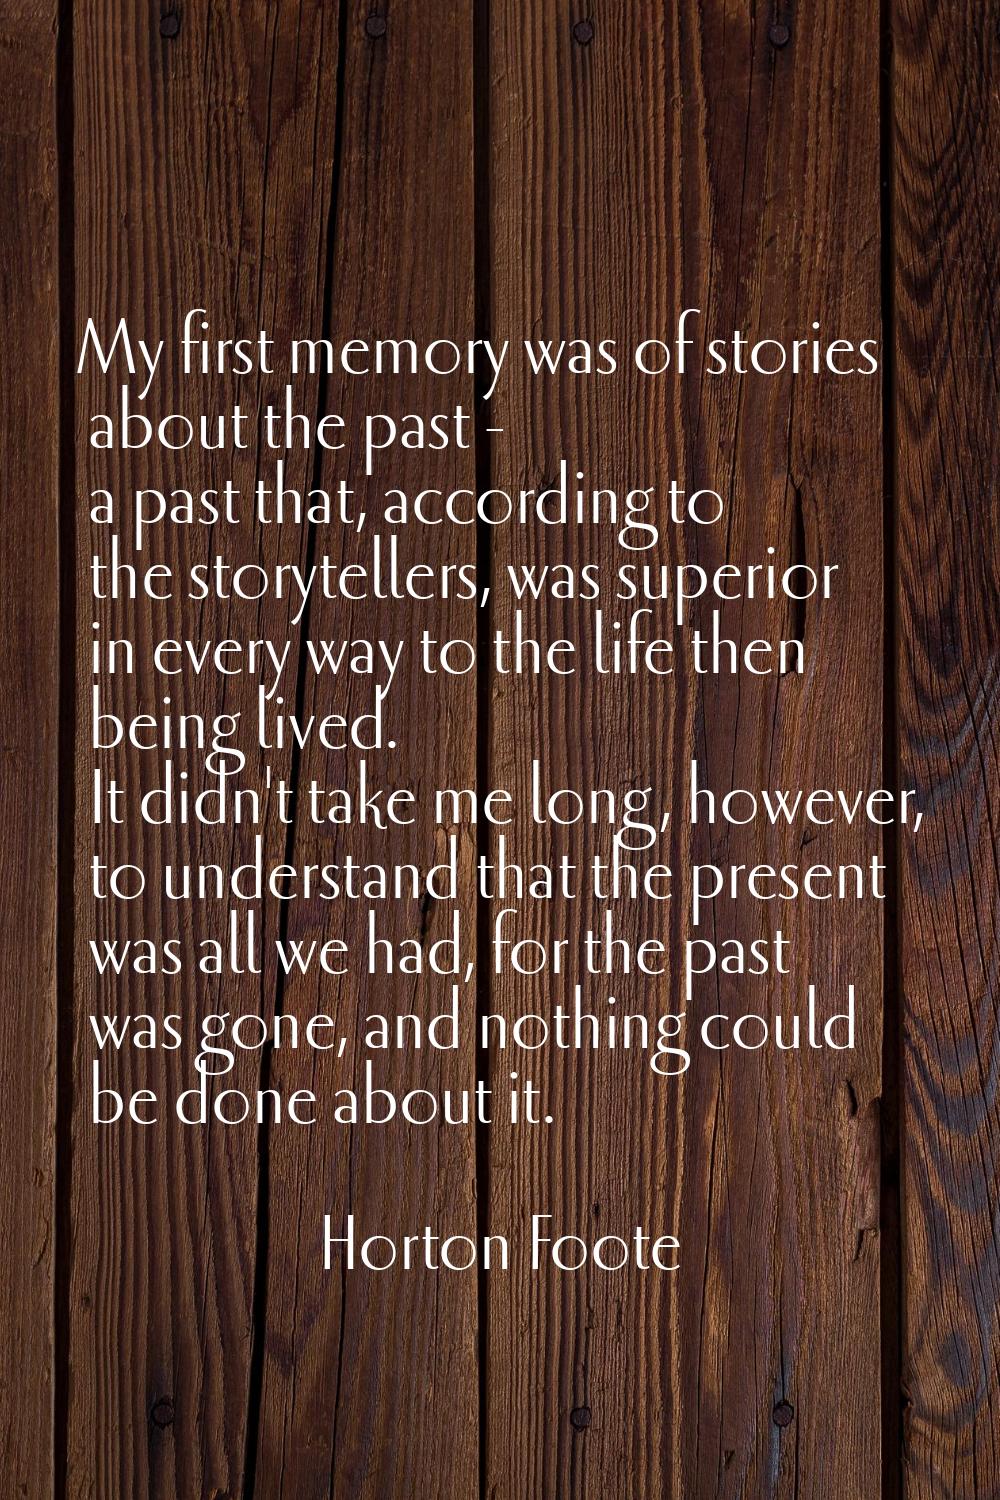 My first memory was of stories about the past - a past that, according to the storytellers, was sup